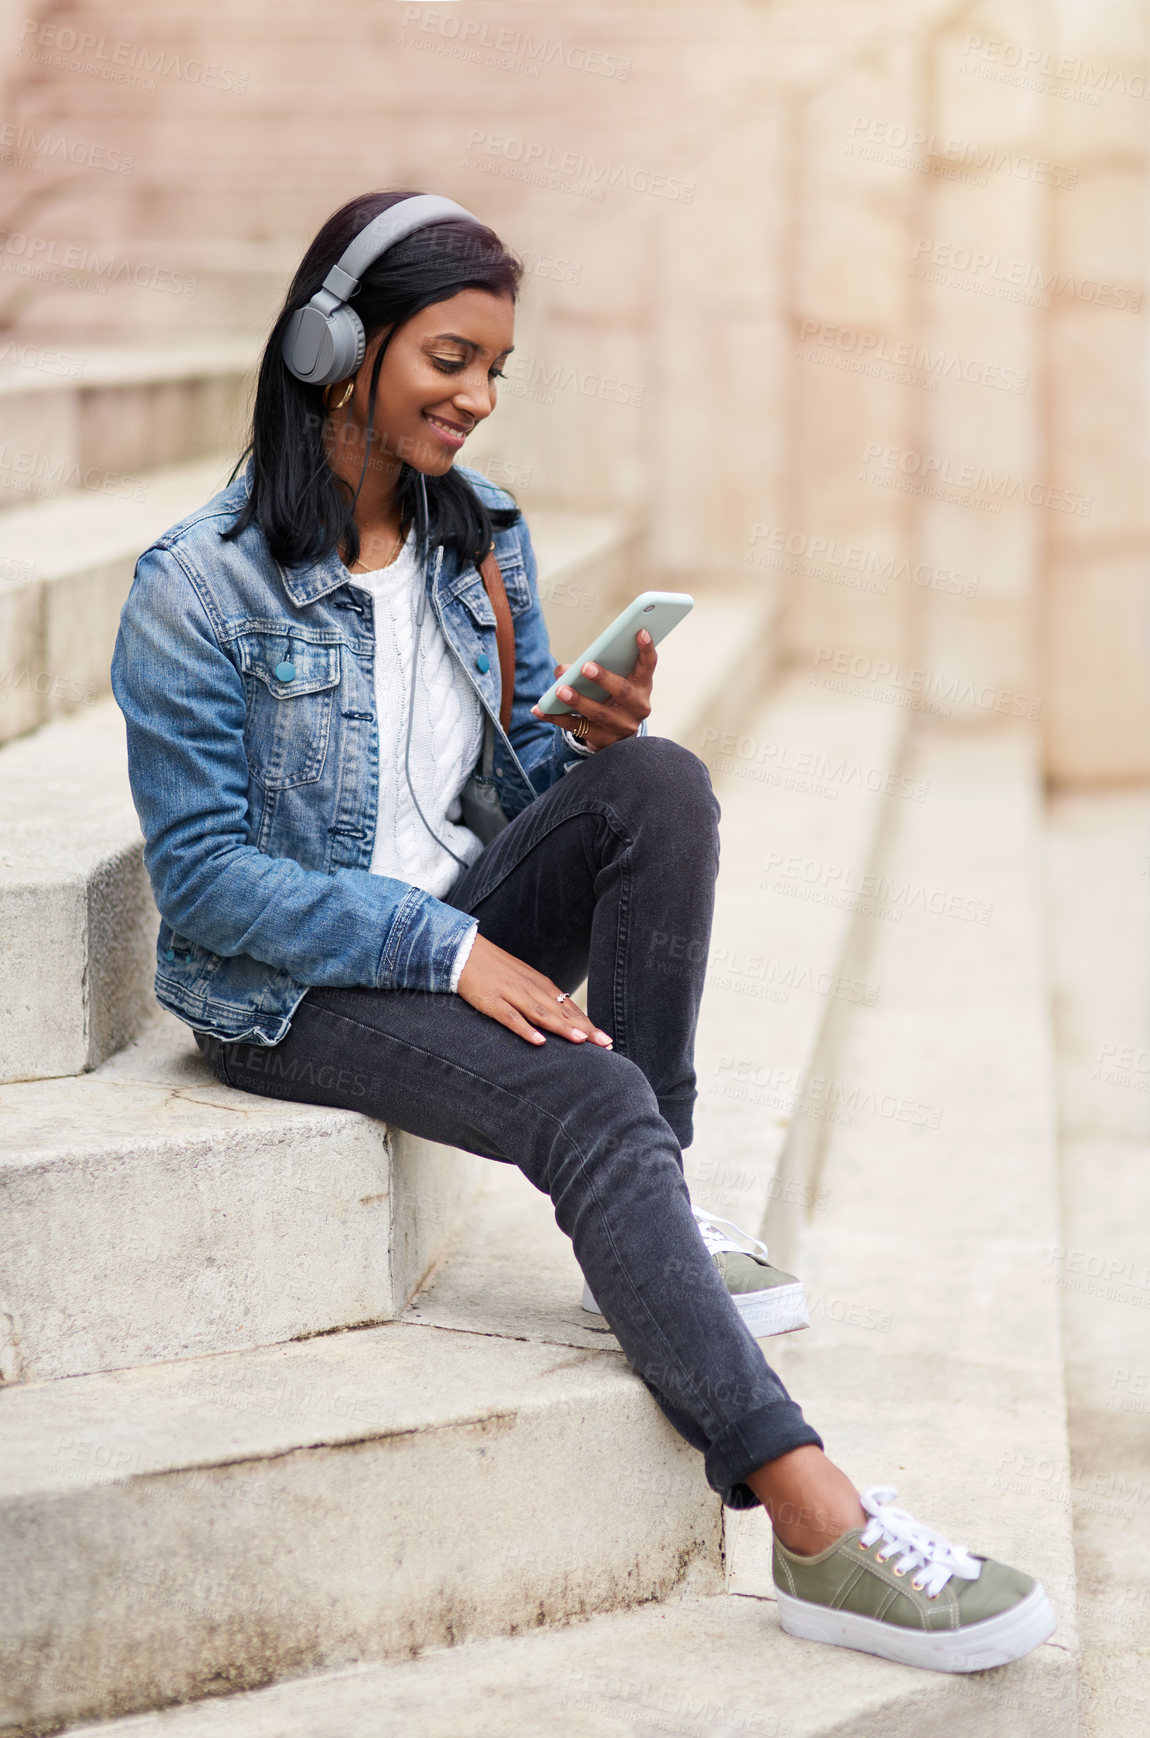 Buy stock photo Shot of a young woman wearing headphones while using her cellphone out in the city